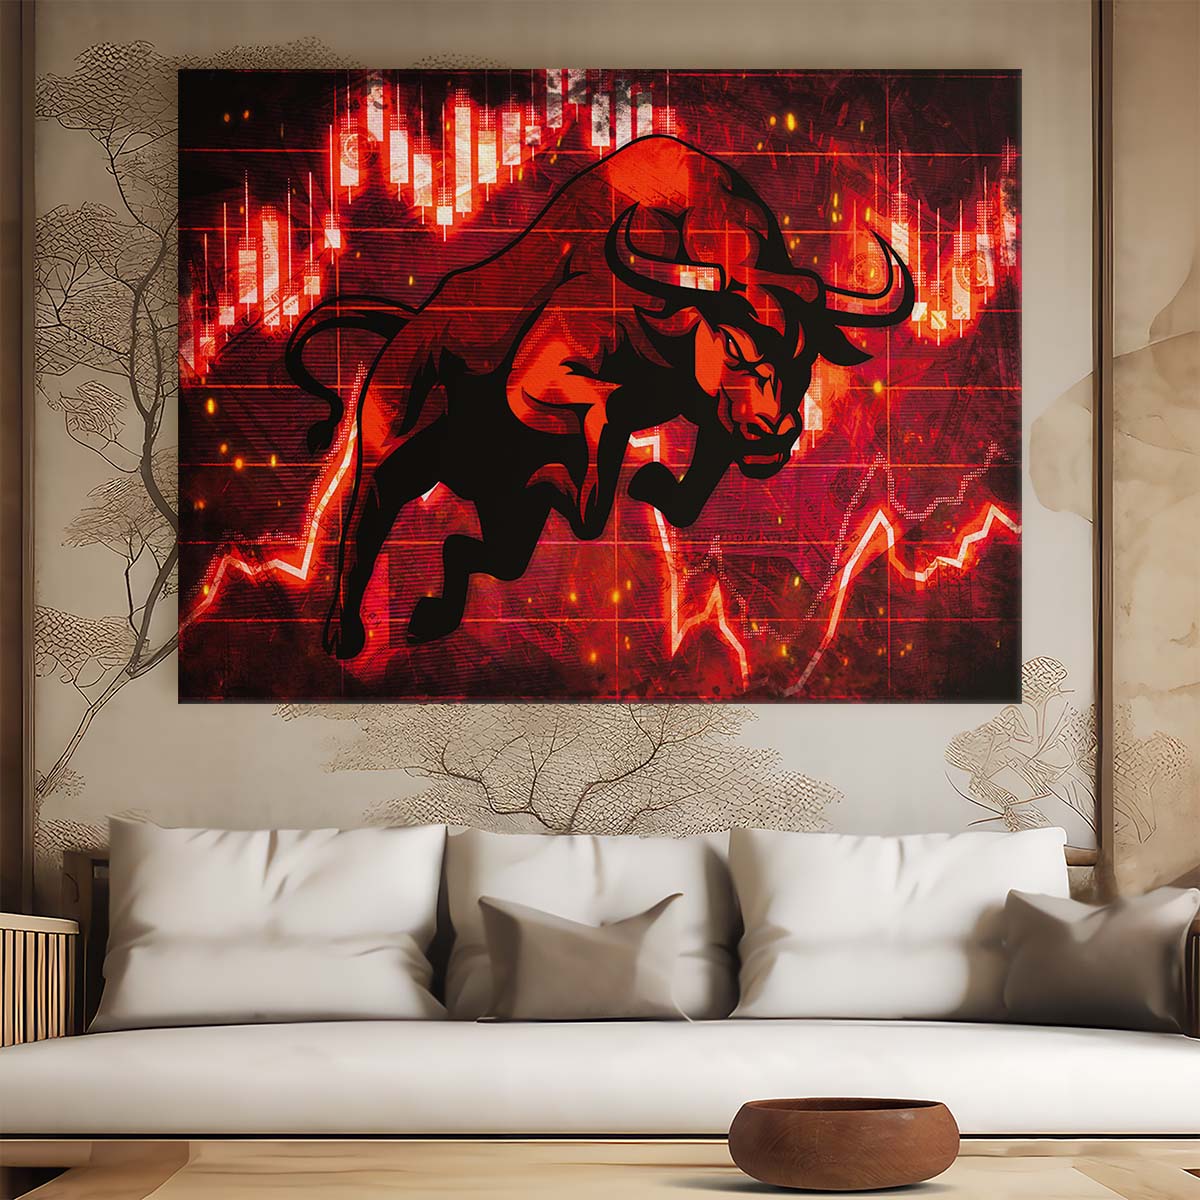 WallStreet Bull Wall Art by Luxuriance Designs. Made in USA.